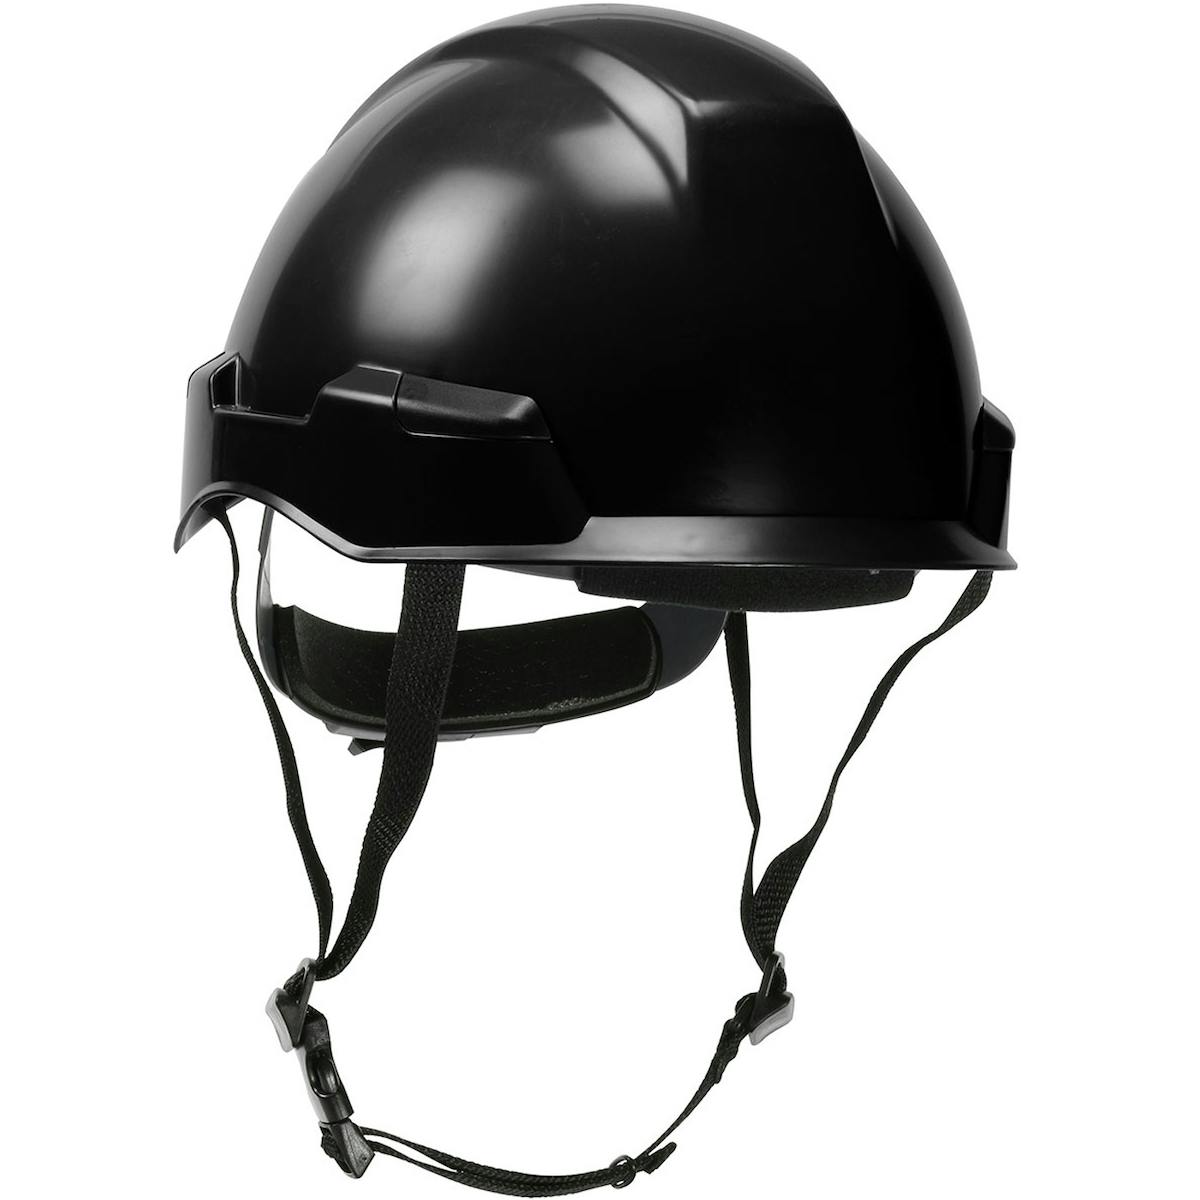 Rocky™ Industrial Climbing Helmet with Mips® Technology, Polycarbonate/ABS Shell, Hi-Density Foam Impact Liner, Nylon Suspension, Wheel Ratchet Adjustment and 4-Point Chin Strap (280-HP142RM)_2